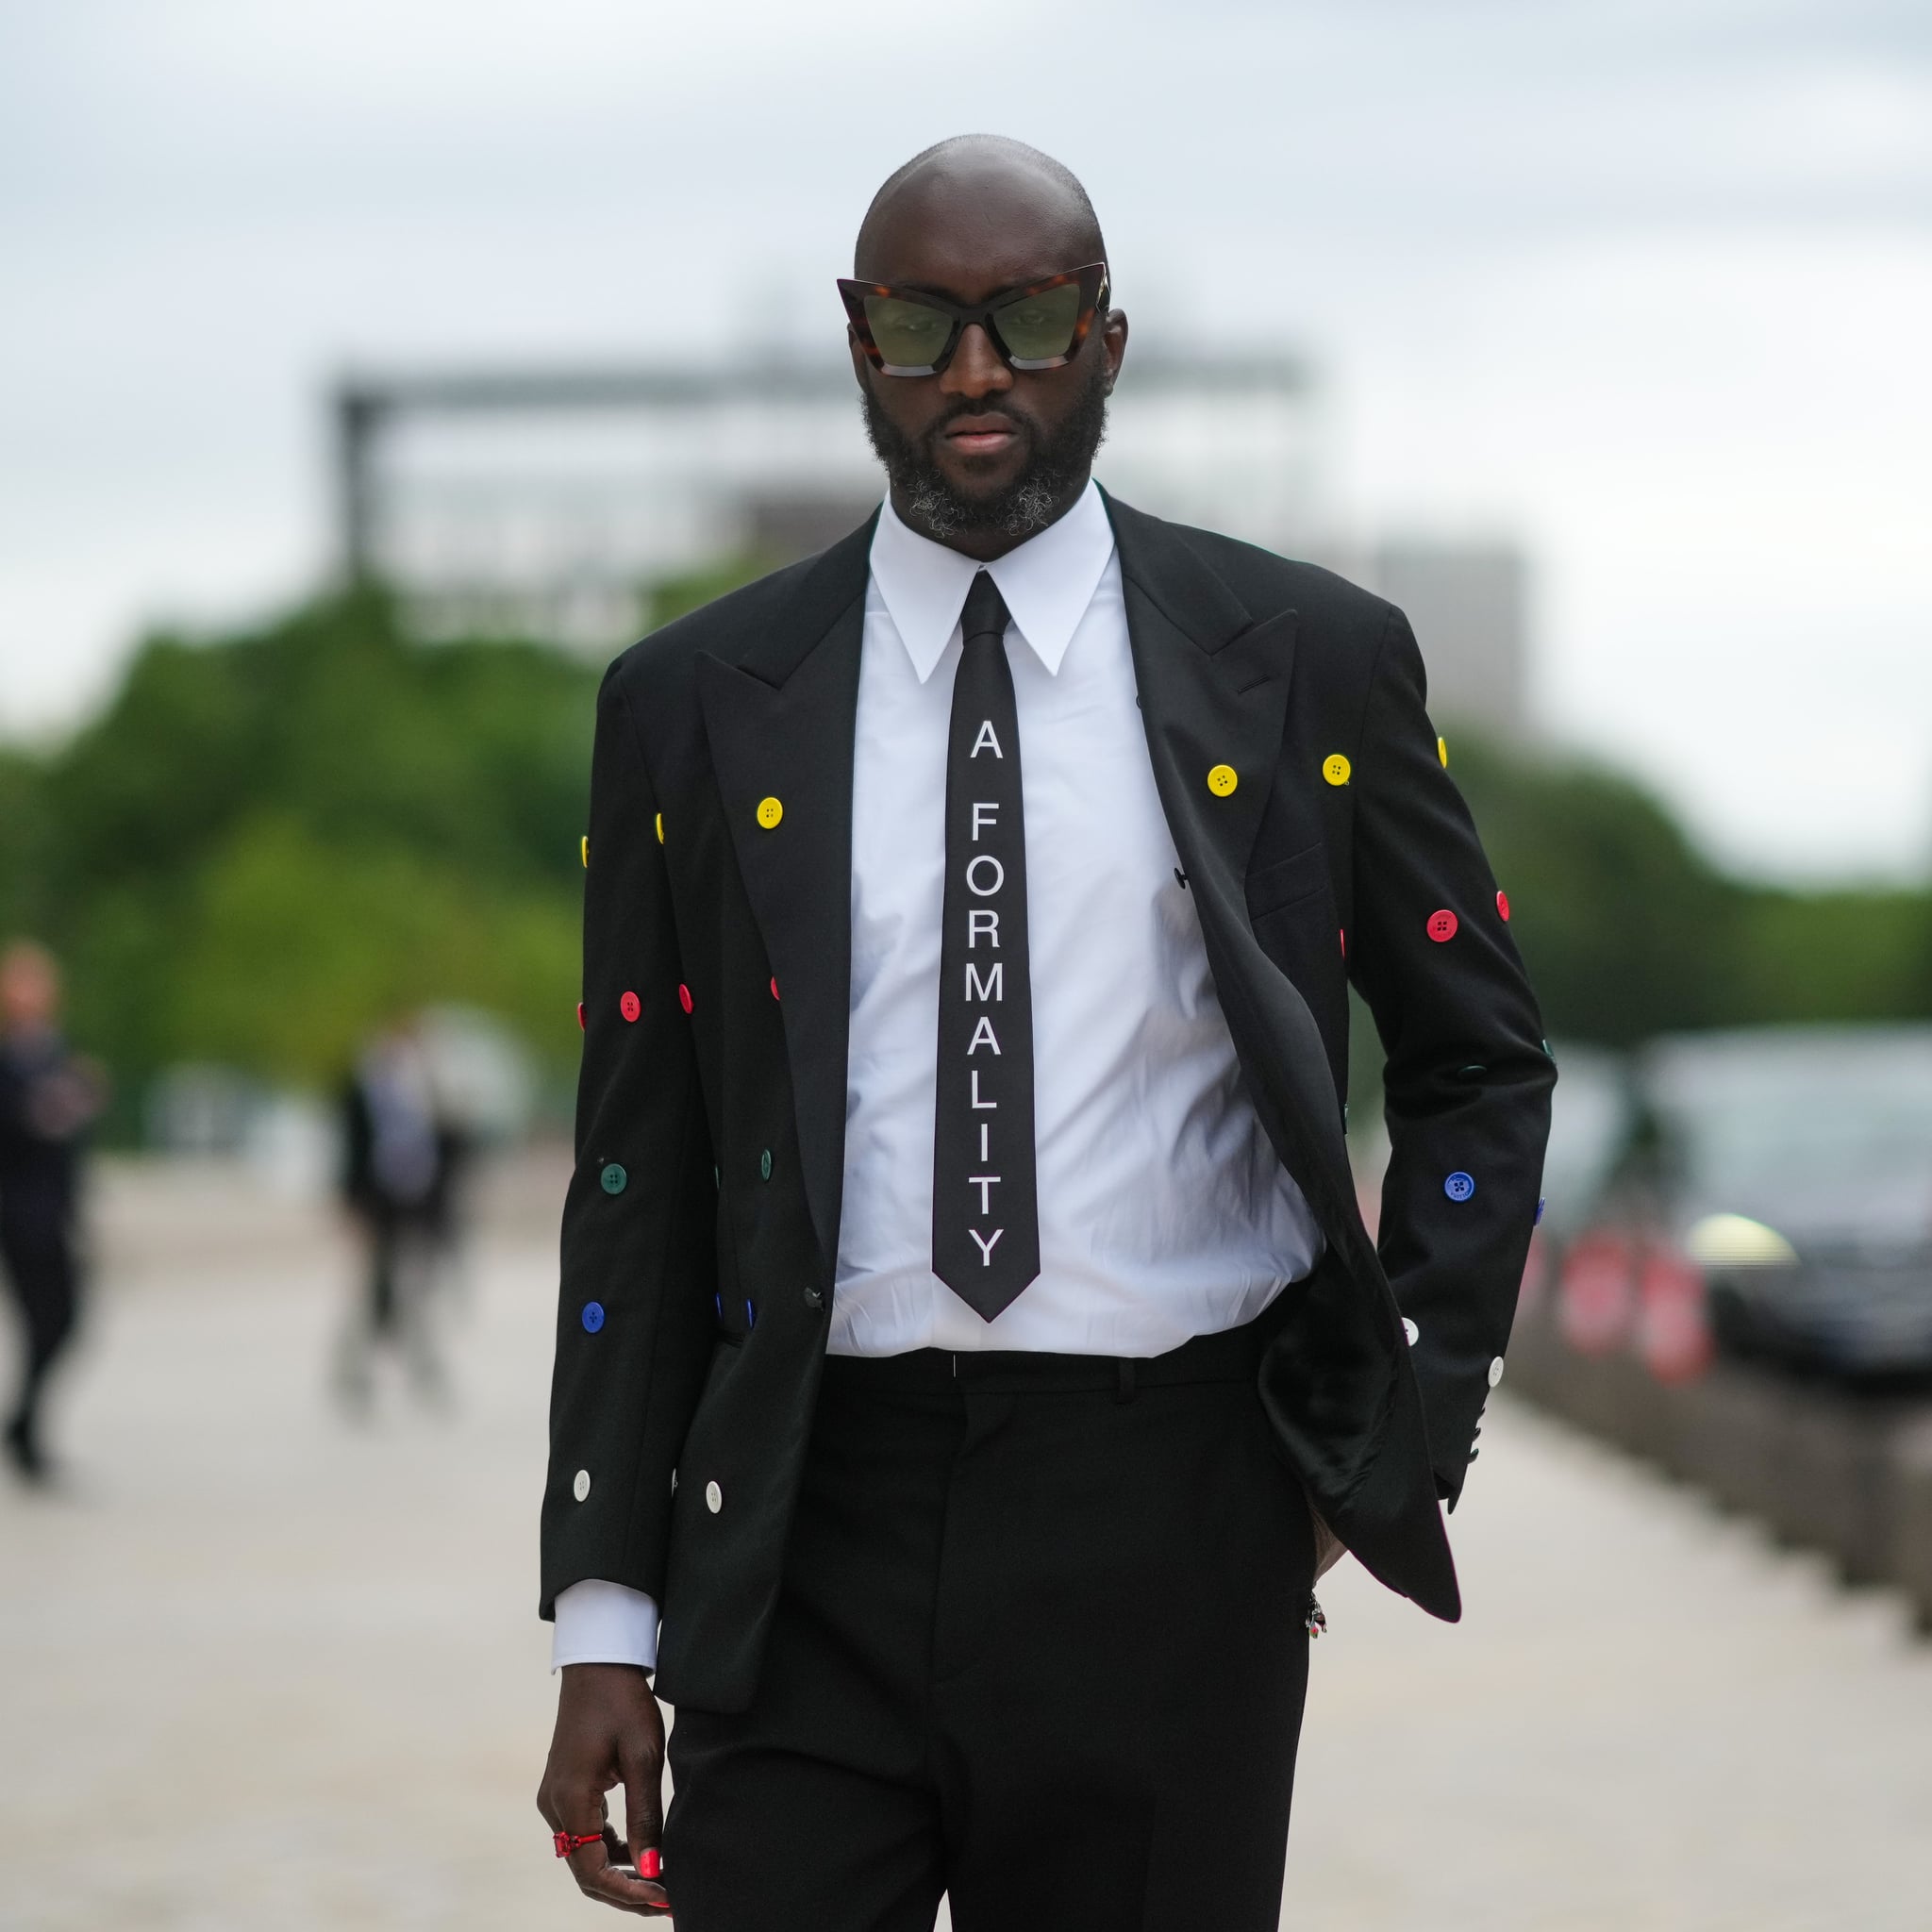 Virgil Abloh was honoured at the Grammys – but WTF is a 'Hip Hop